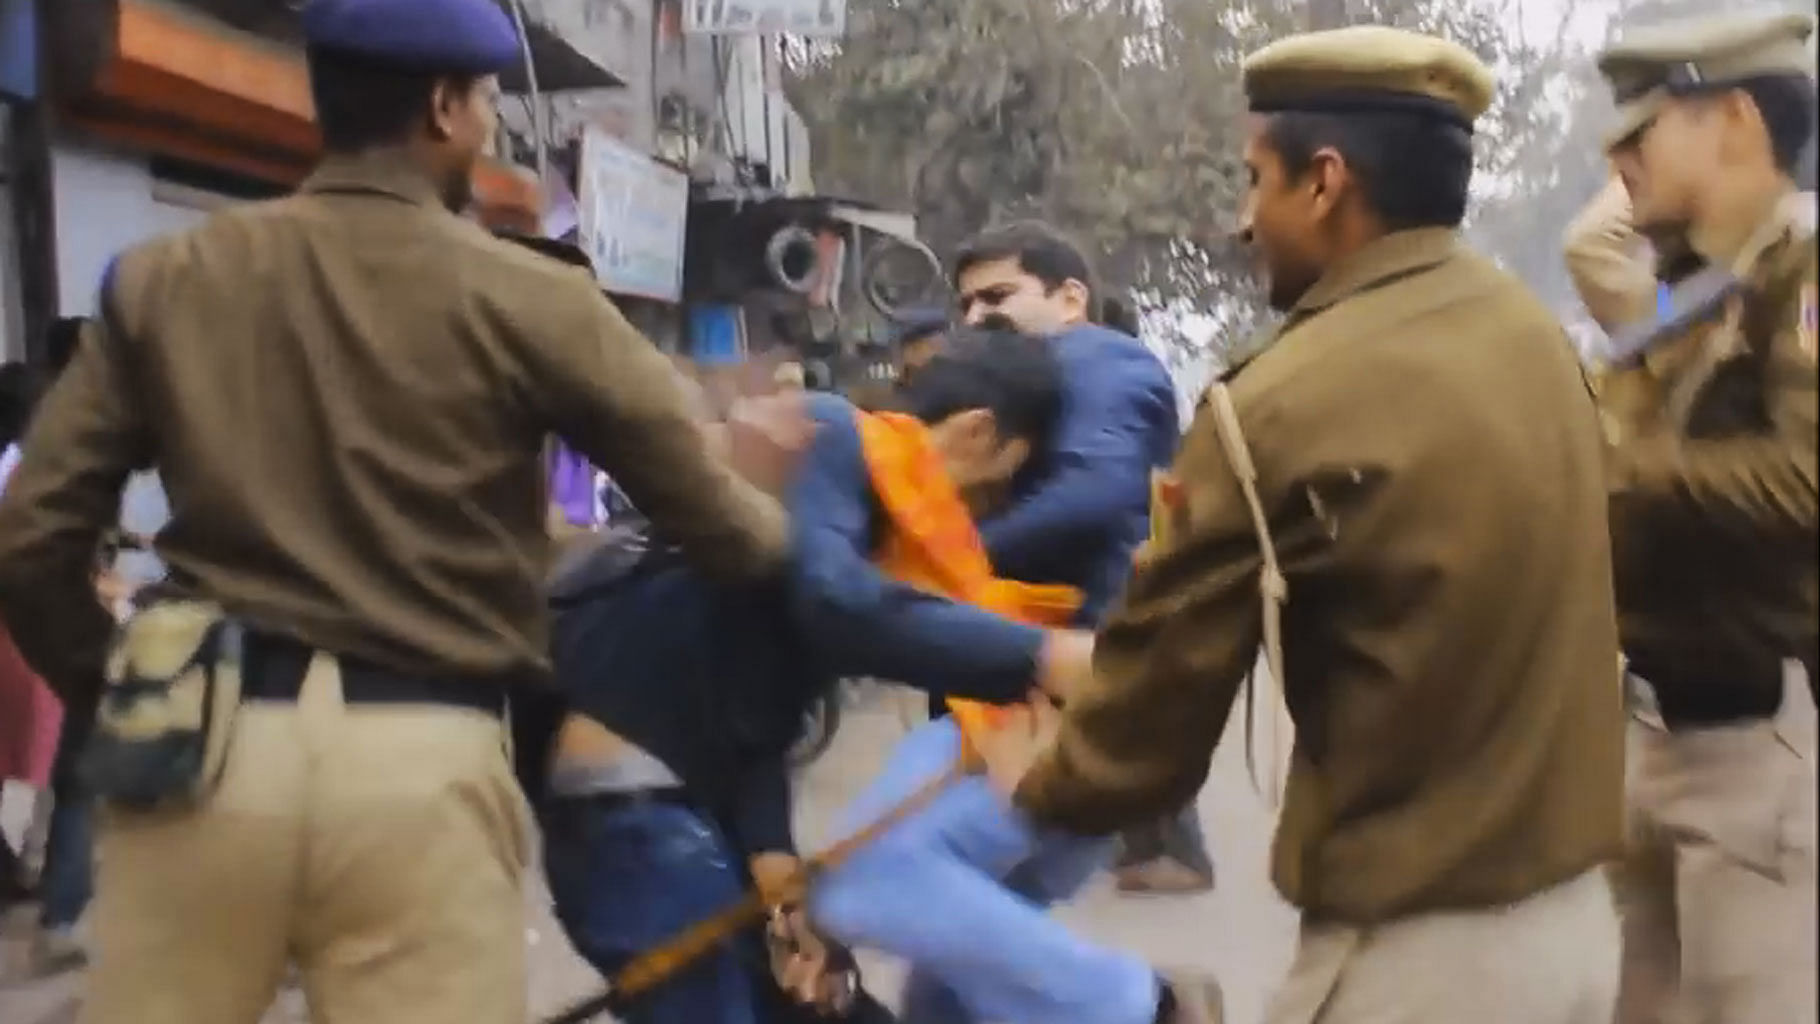 Screen grab from the video showing Delhi Police personal cracking down on protesters. (Photo Courtesy: Sanghapali Aruna Kornana’s Facebook)